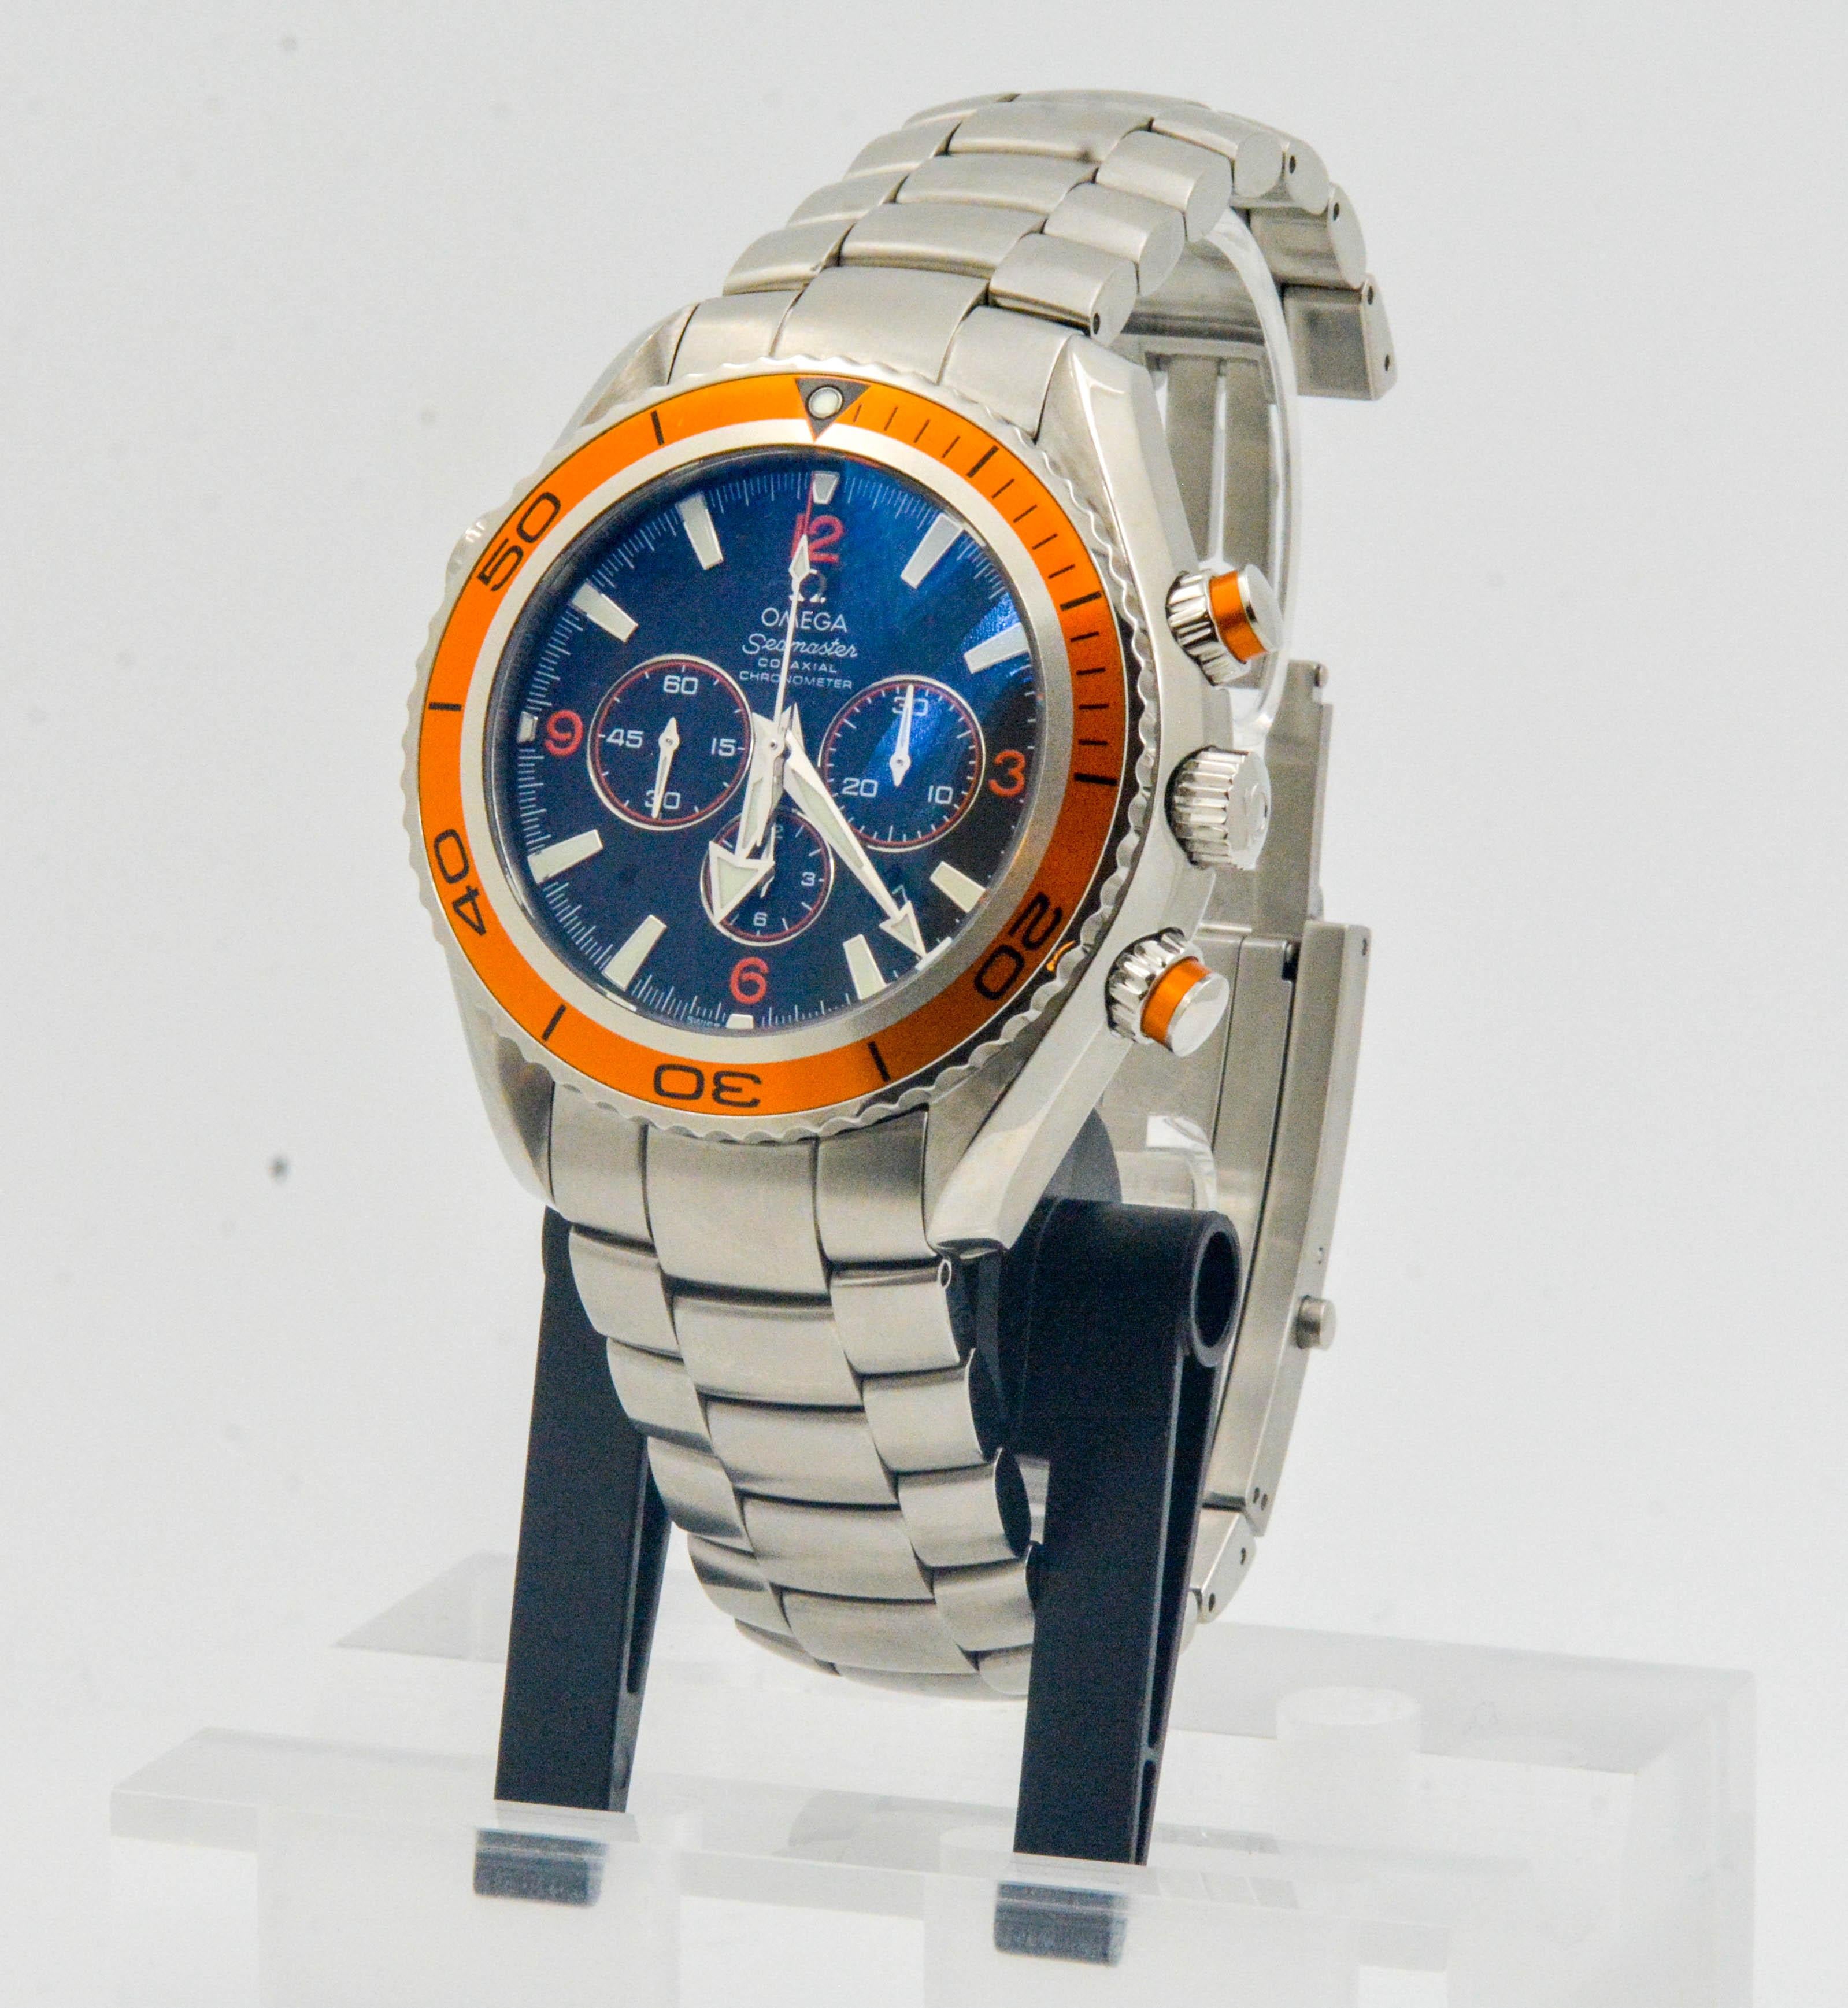 • Model: OMEGA Seamaster Planet Ocean Chronograph
• Movement: Automatic, water resistant diver's watch
• Case Size: 45mm 
• Case Material: Stainless steel
• Dial: Dark Navy Blue with orange bezel; with 3 sub dials 
• Strap: Stainless steel